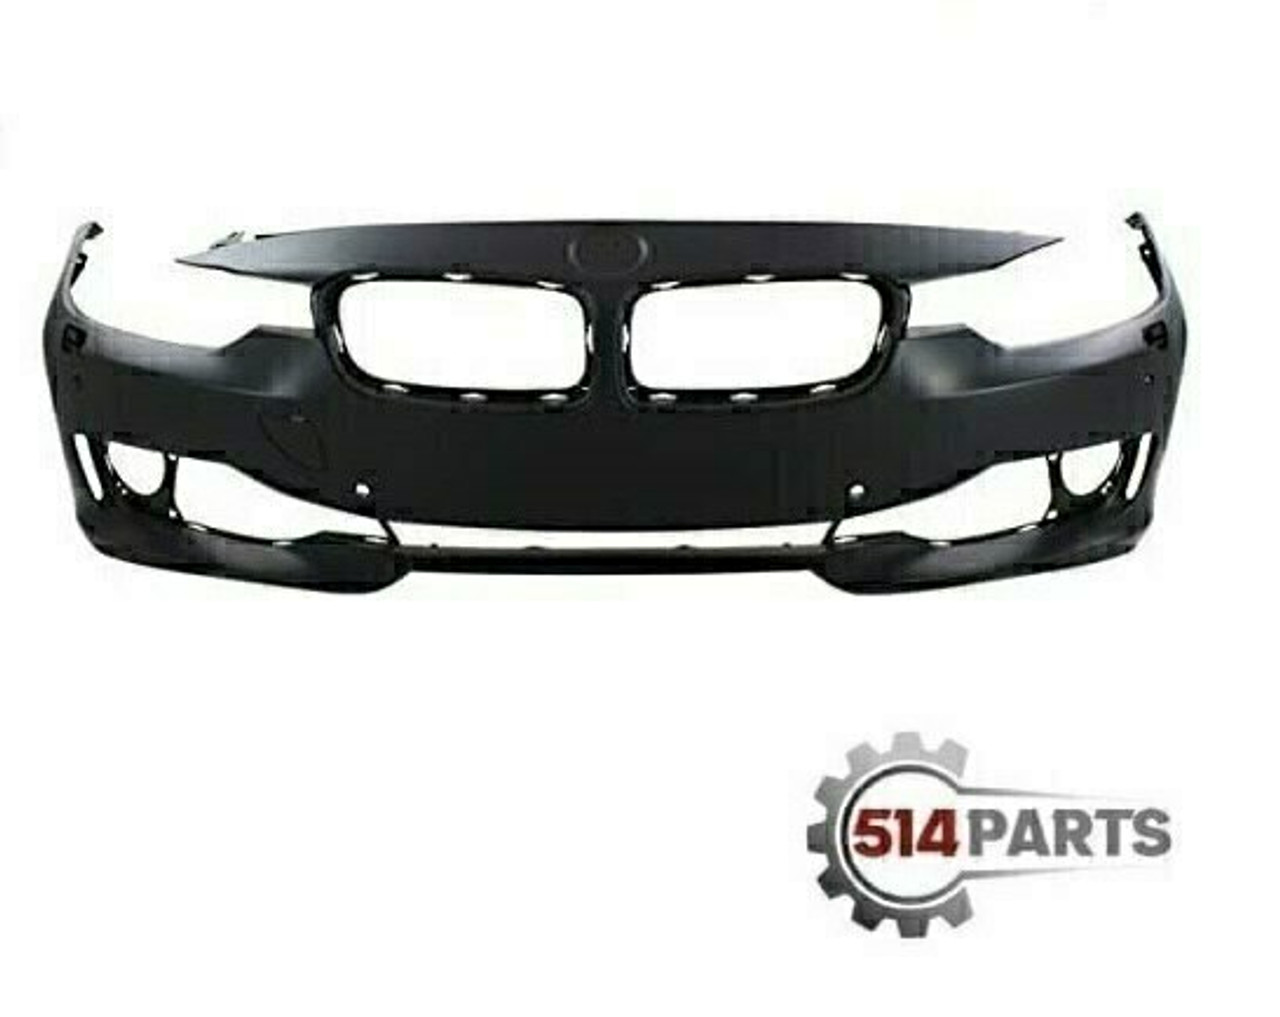 2012 - 2015 BMW 3 SERIES SEDAN/WAGON FRONT BUMPER WITH SENSOR WITH HEAD LIGHTS WASHER WITH CAMERA WITH PARK DISTANCE CONTROL WITH MOLDING - PARE-CHOCS AVANT AVEC SENSOR AVEC LAVE PHARES AVEC CAMERA AVEC PARK DISTANCE CONTROL AVEC MOLDING